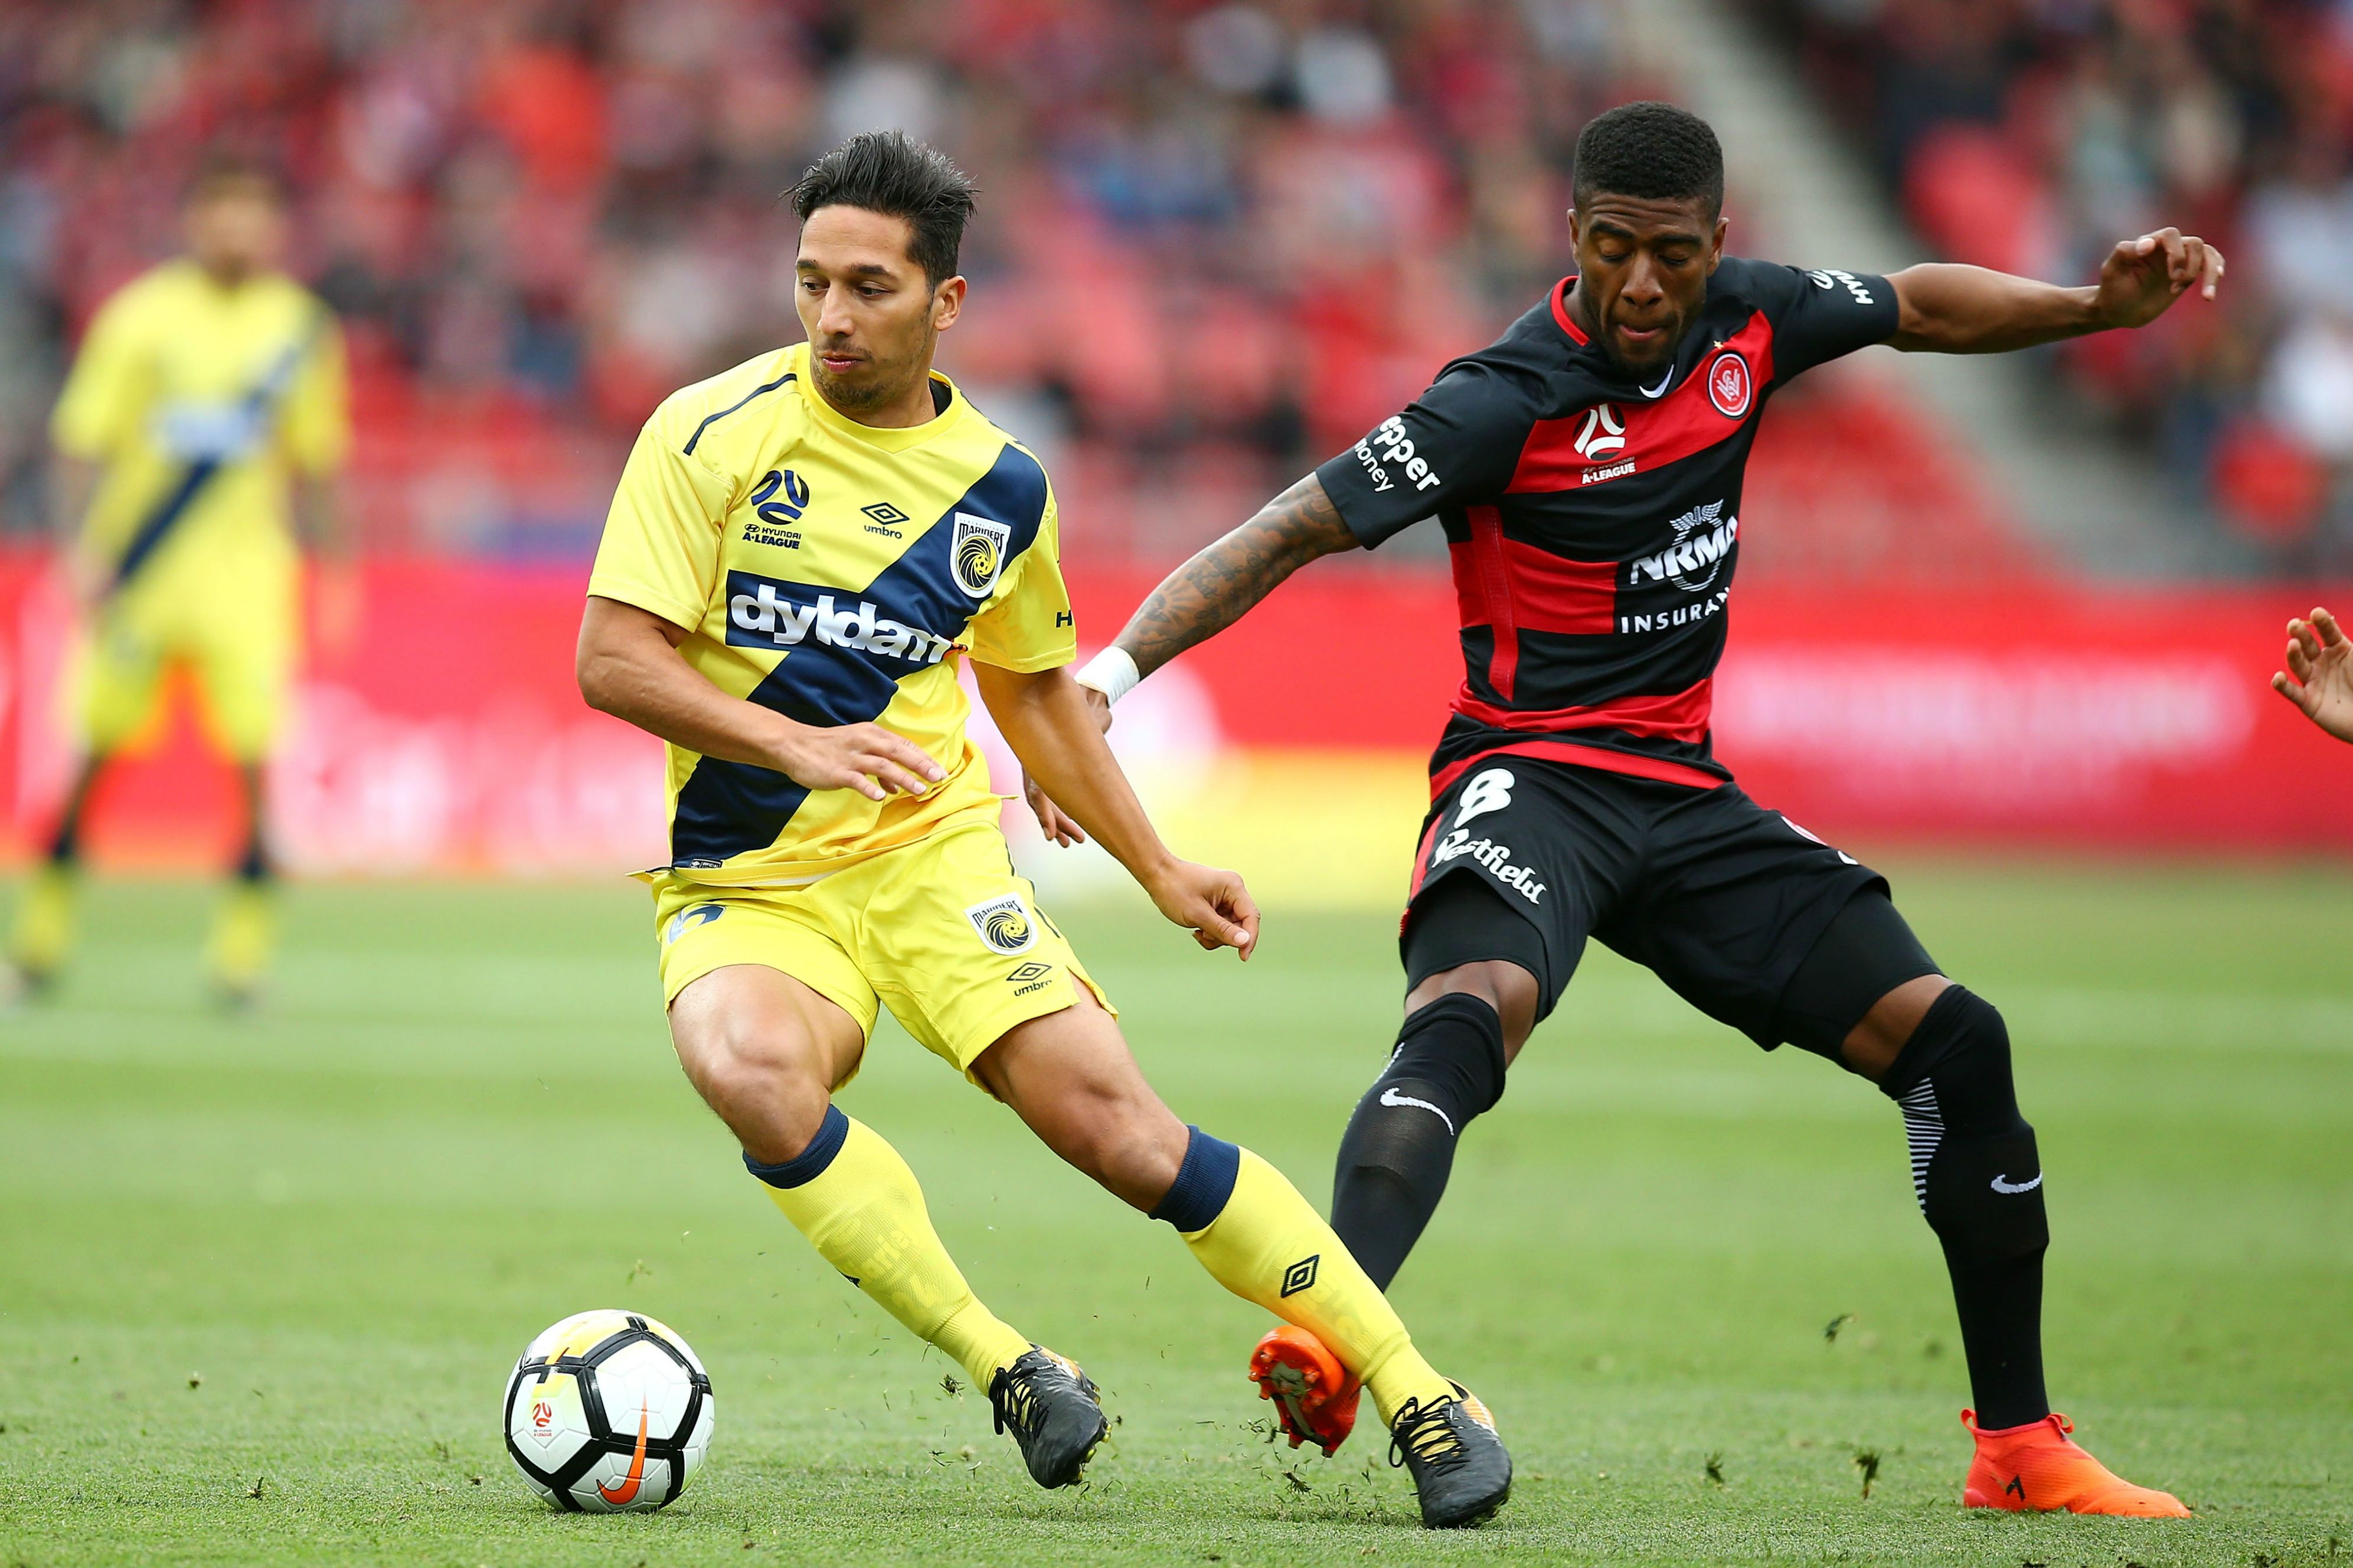 Western Sydney Wanderers FC vs Central Coast Mariners FC Prediction, Betting Tips & Odds | 04 MARCH, 2023